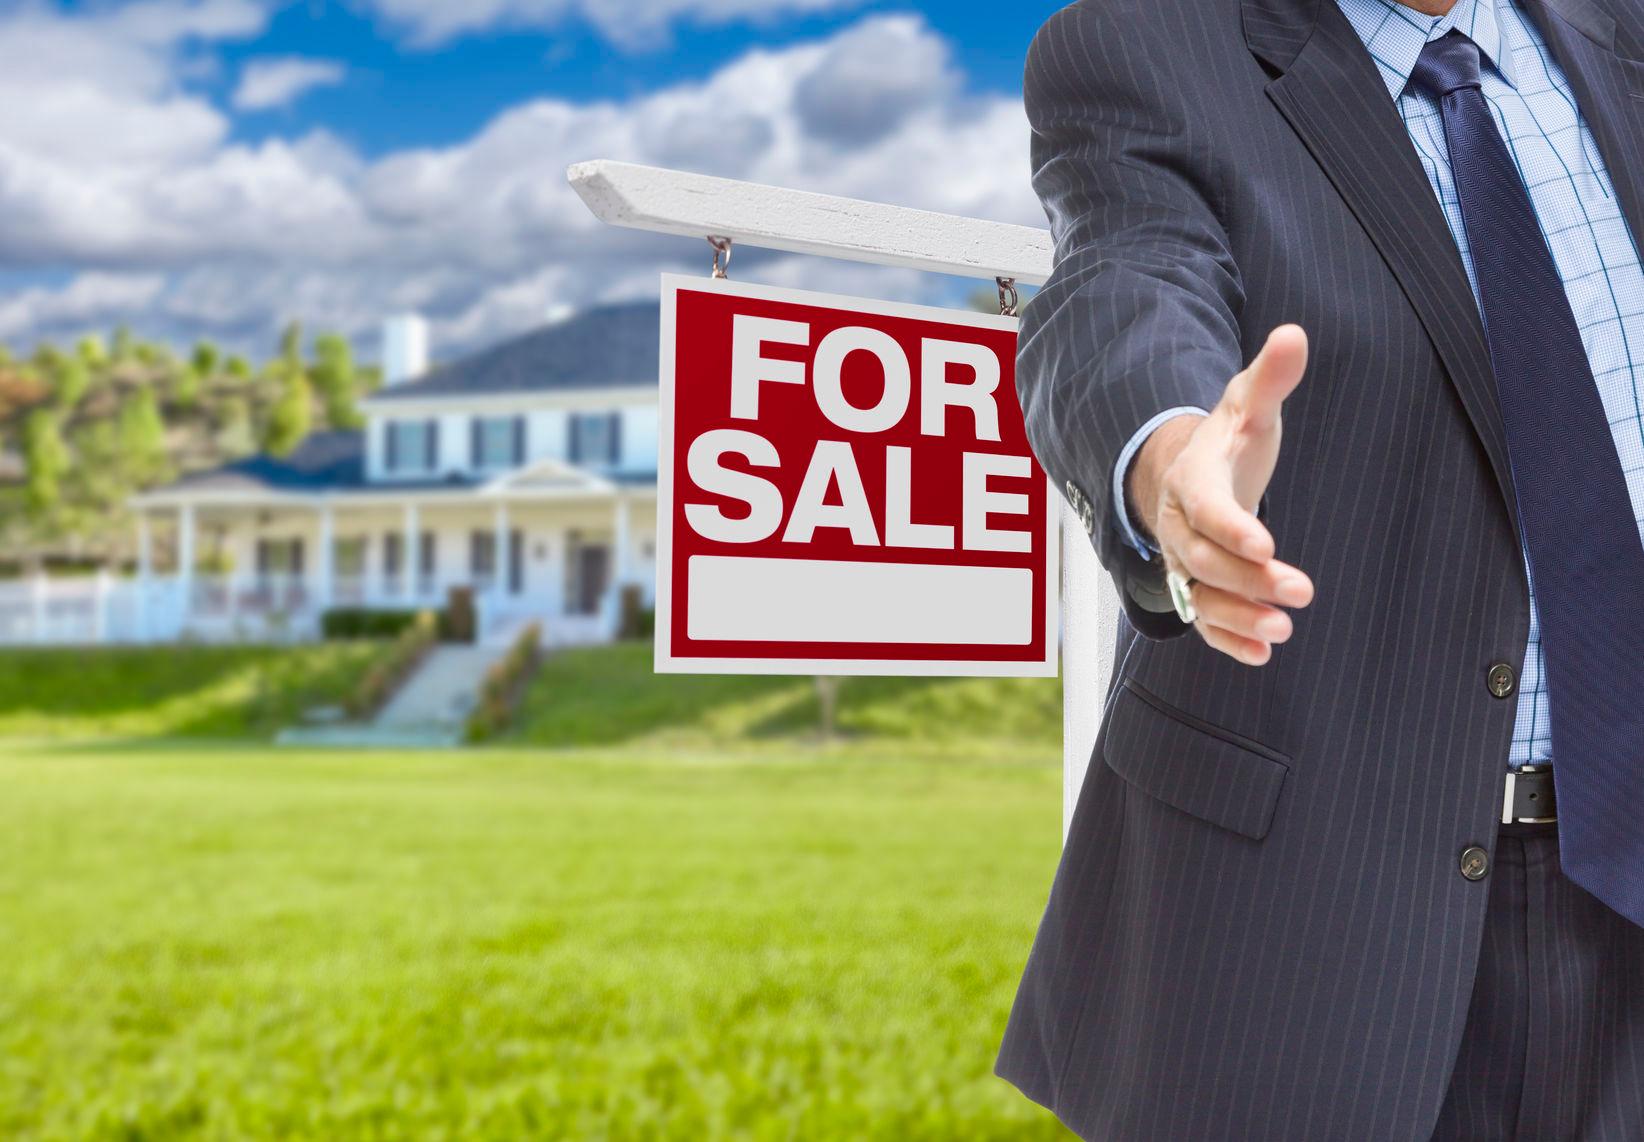 42847518 - real estate agent reaches for handshake with sale sign and new house behind.